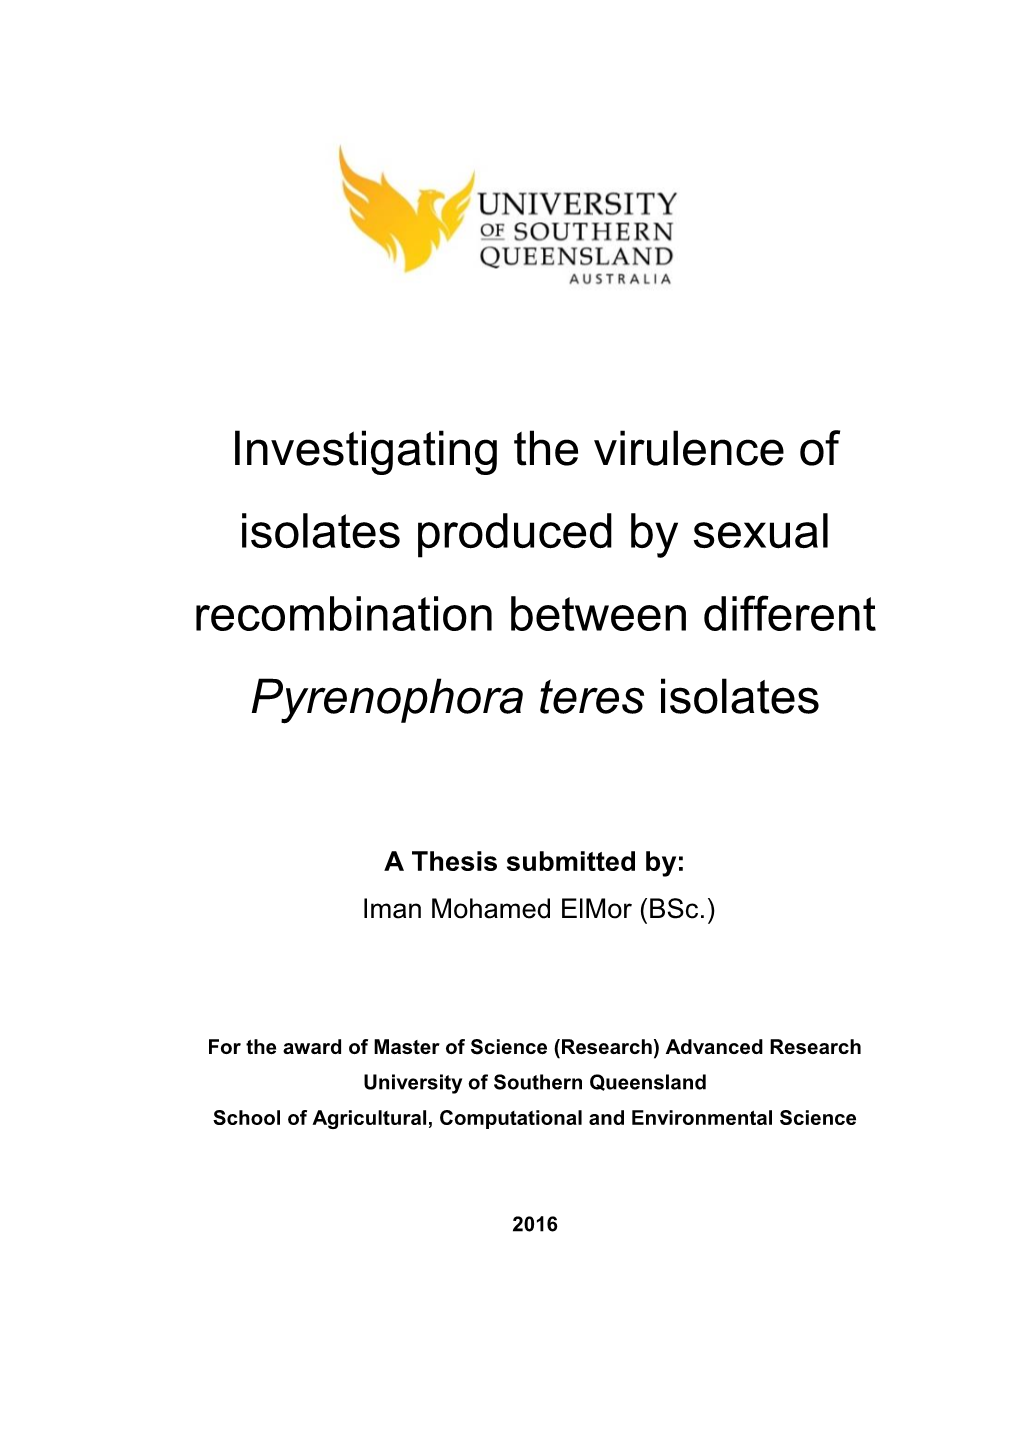 Investigating the Virulence of Isolates Produced by Sexual Recombination Between Different Pyrenophora Teres Isolates